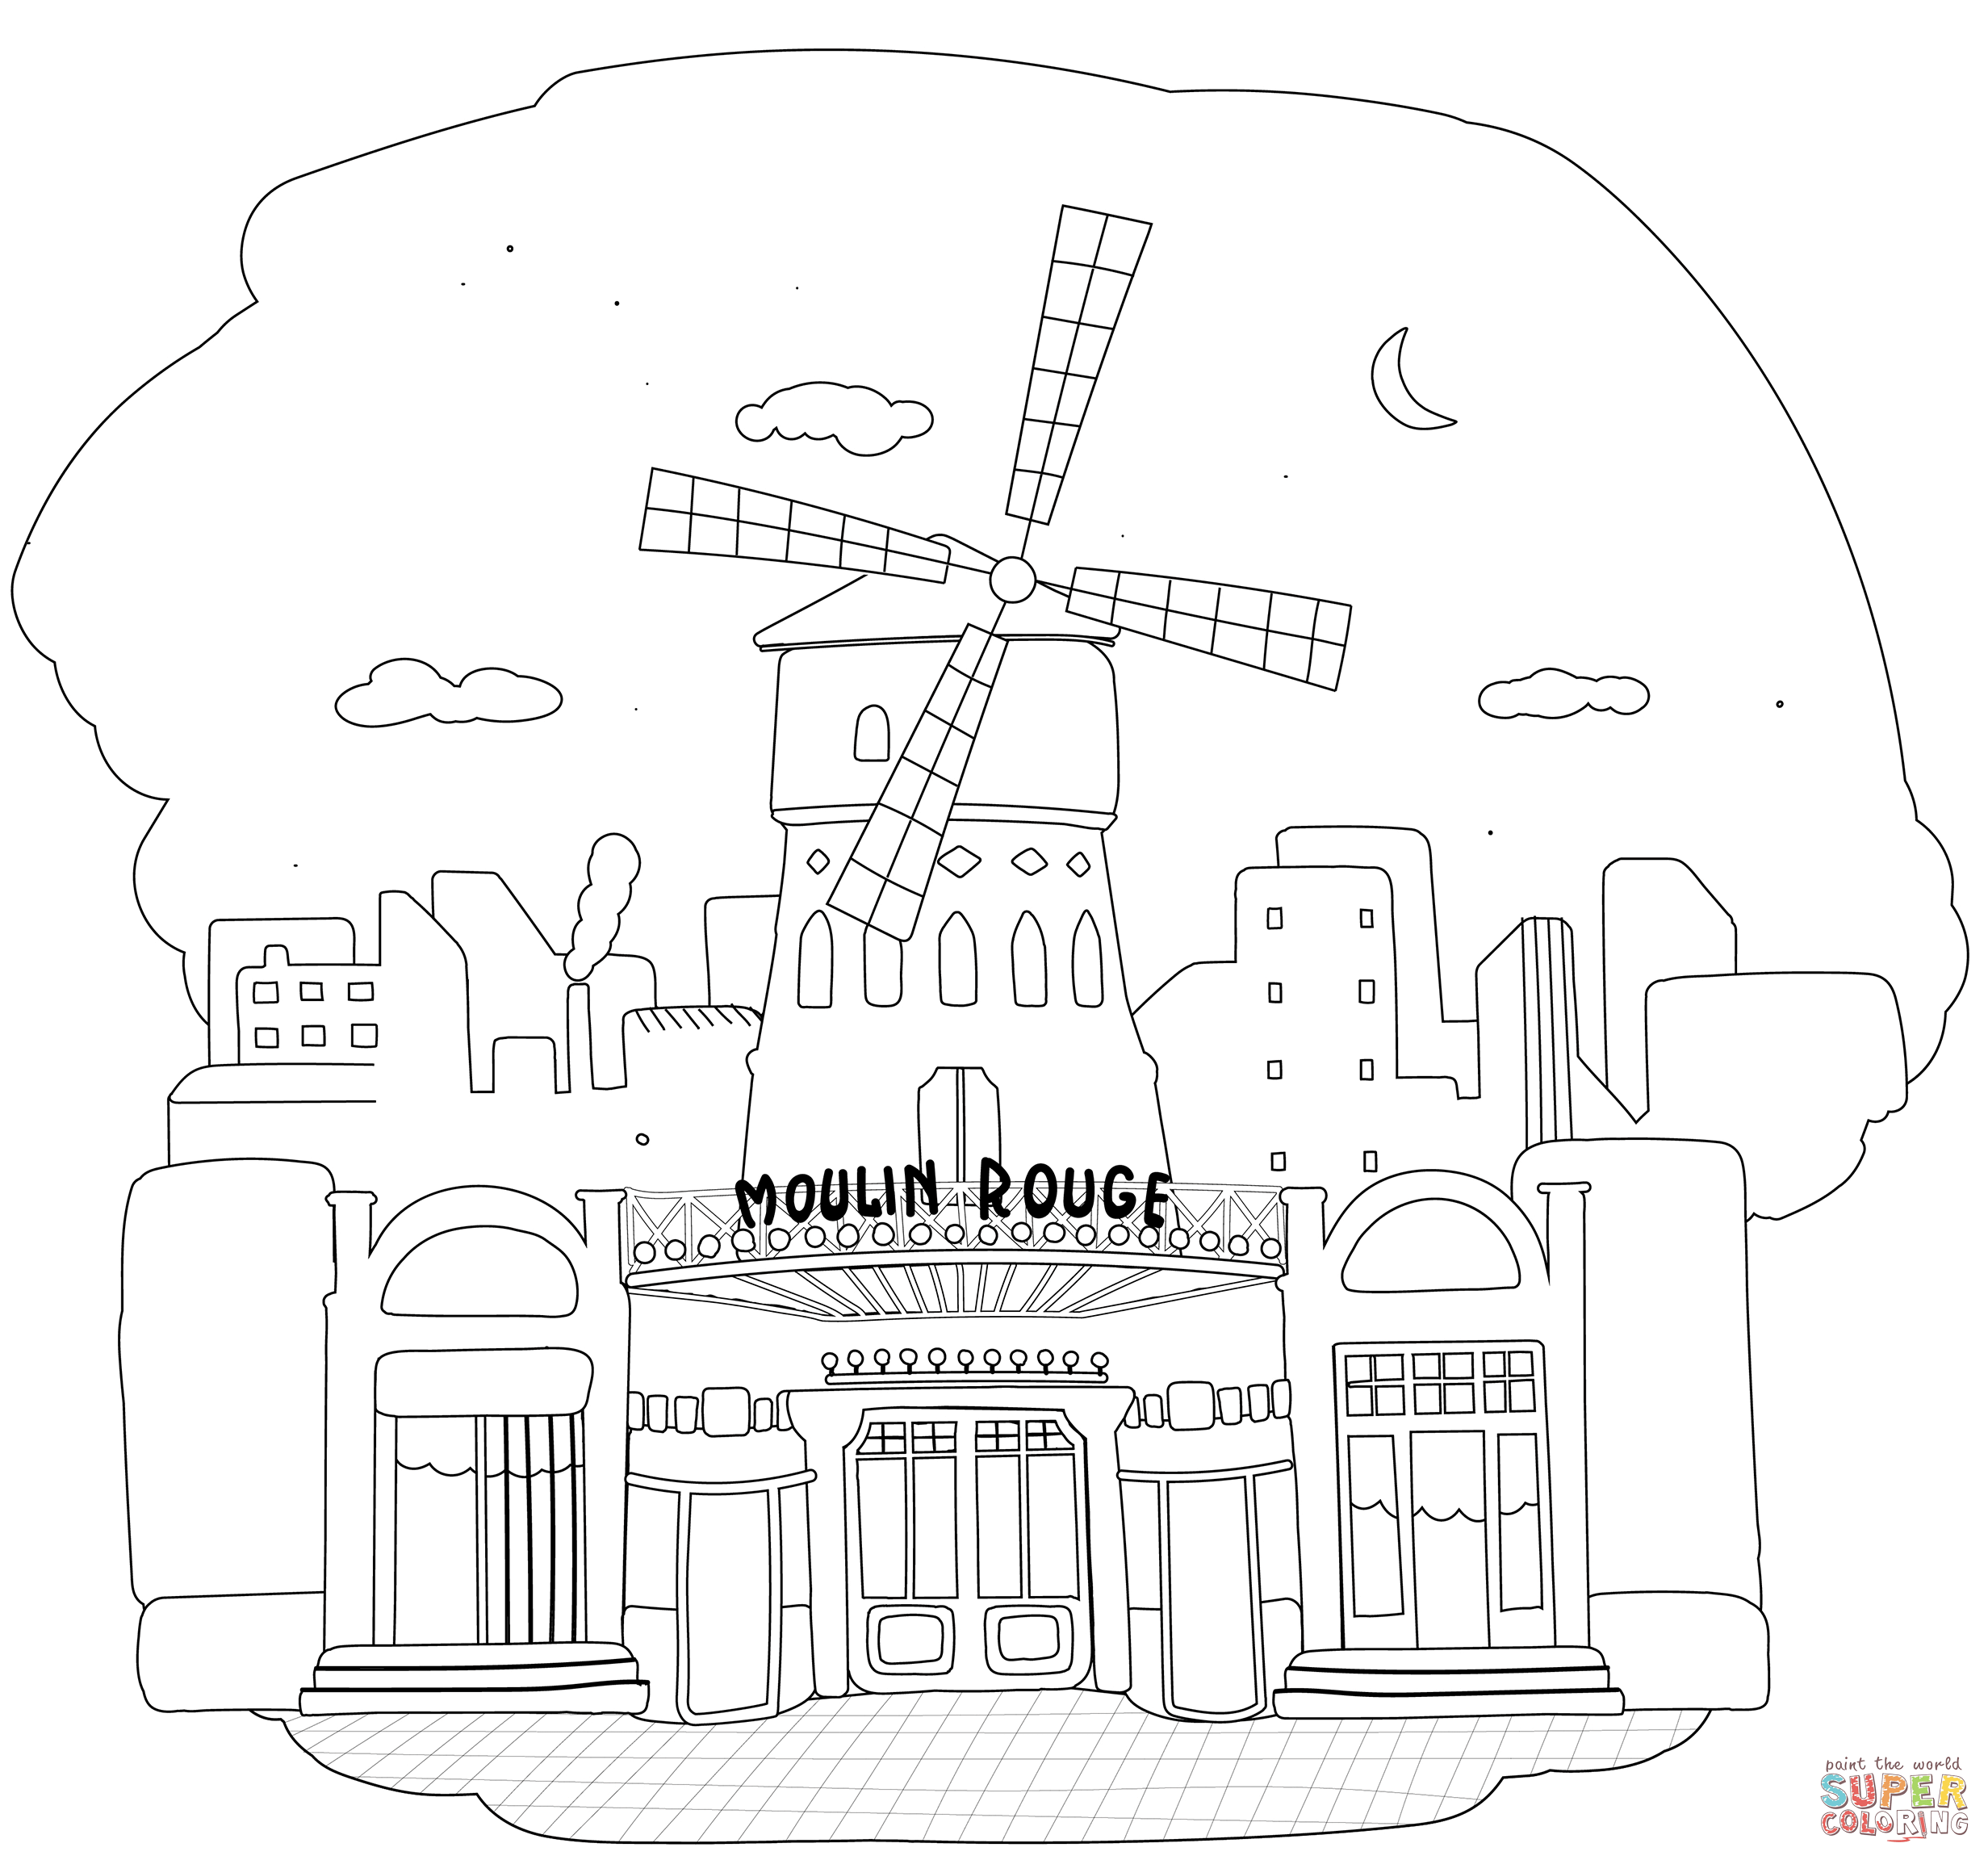 Moulin rouge coloring page free printable coloring pages